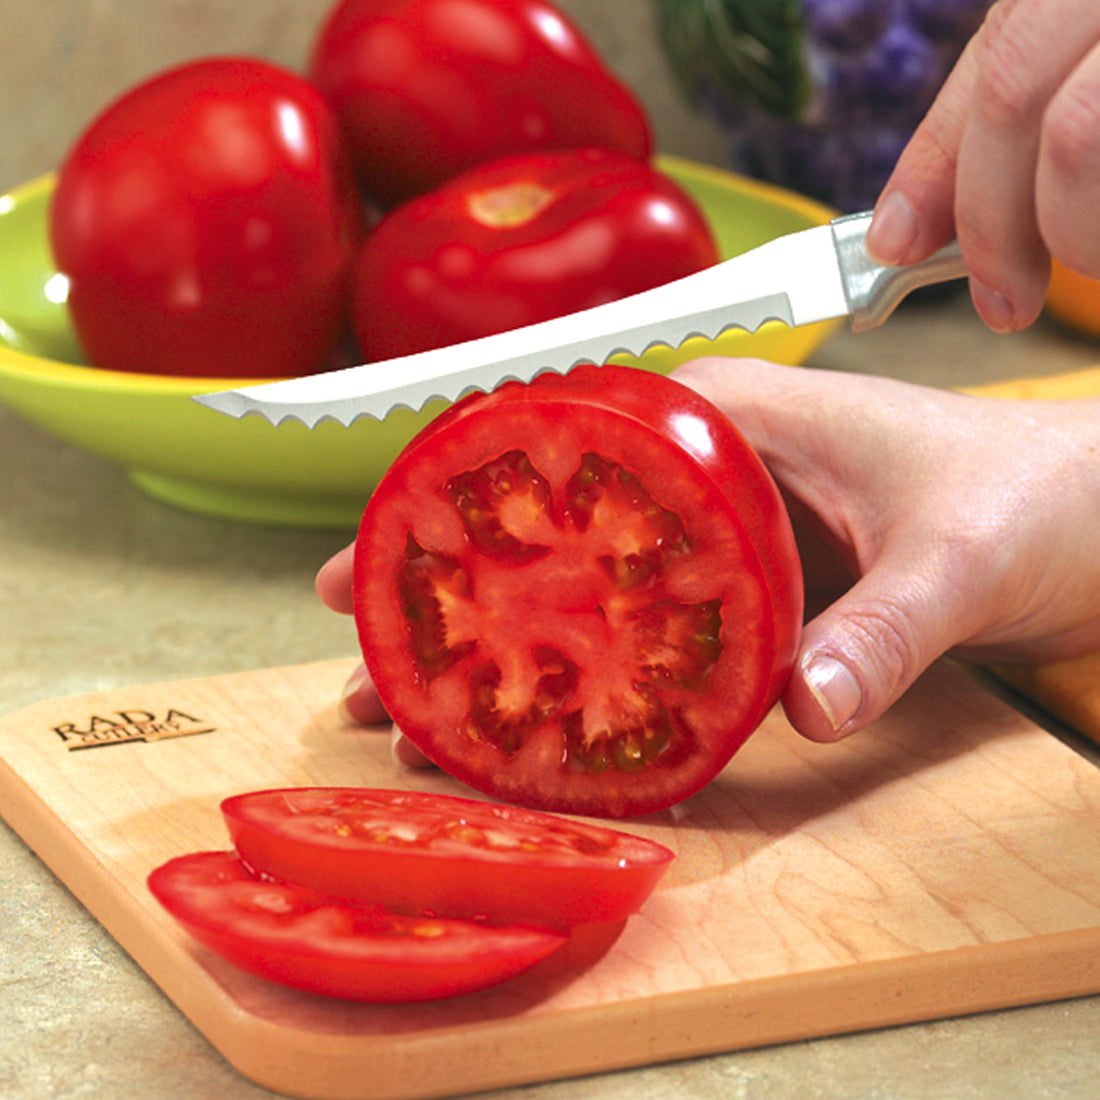 Tomato knife serrated 6.7831 Red 110